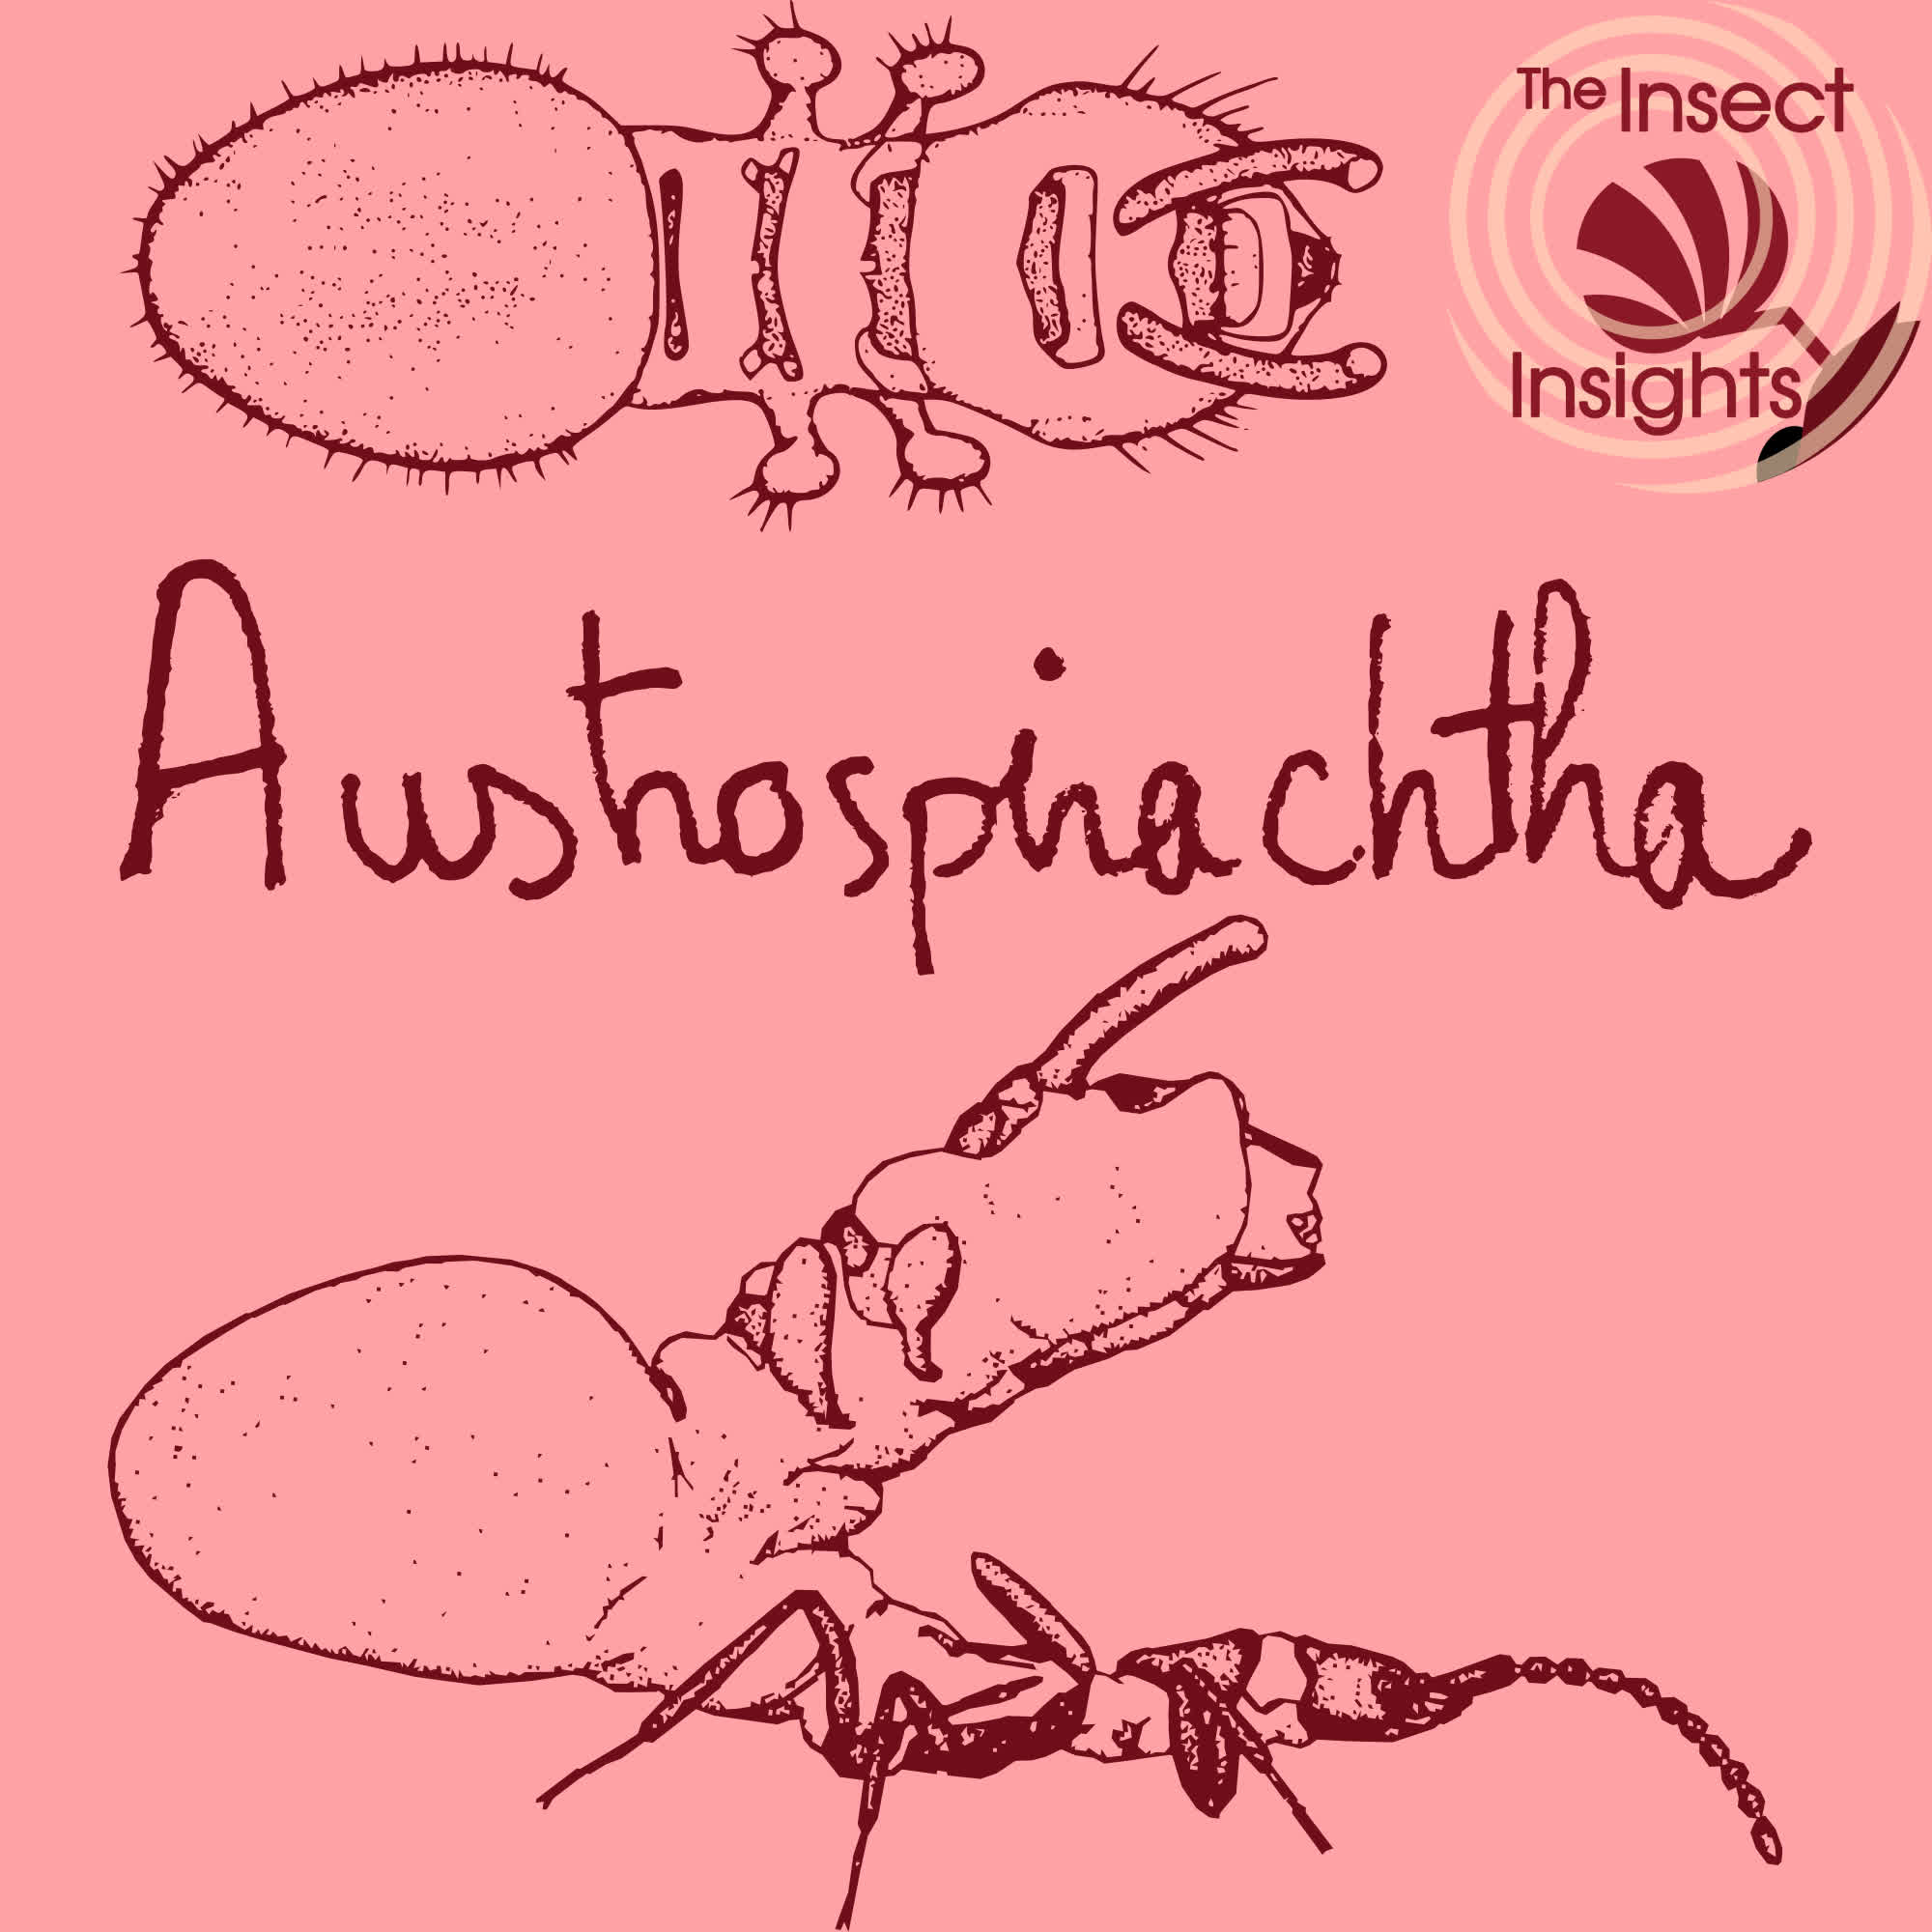 a realistic drawing of the austrospirachtha beetle. It has been colorized with a pink and dark red.